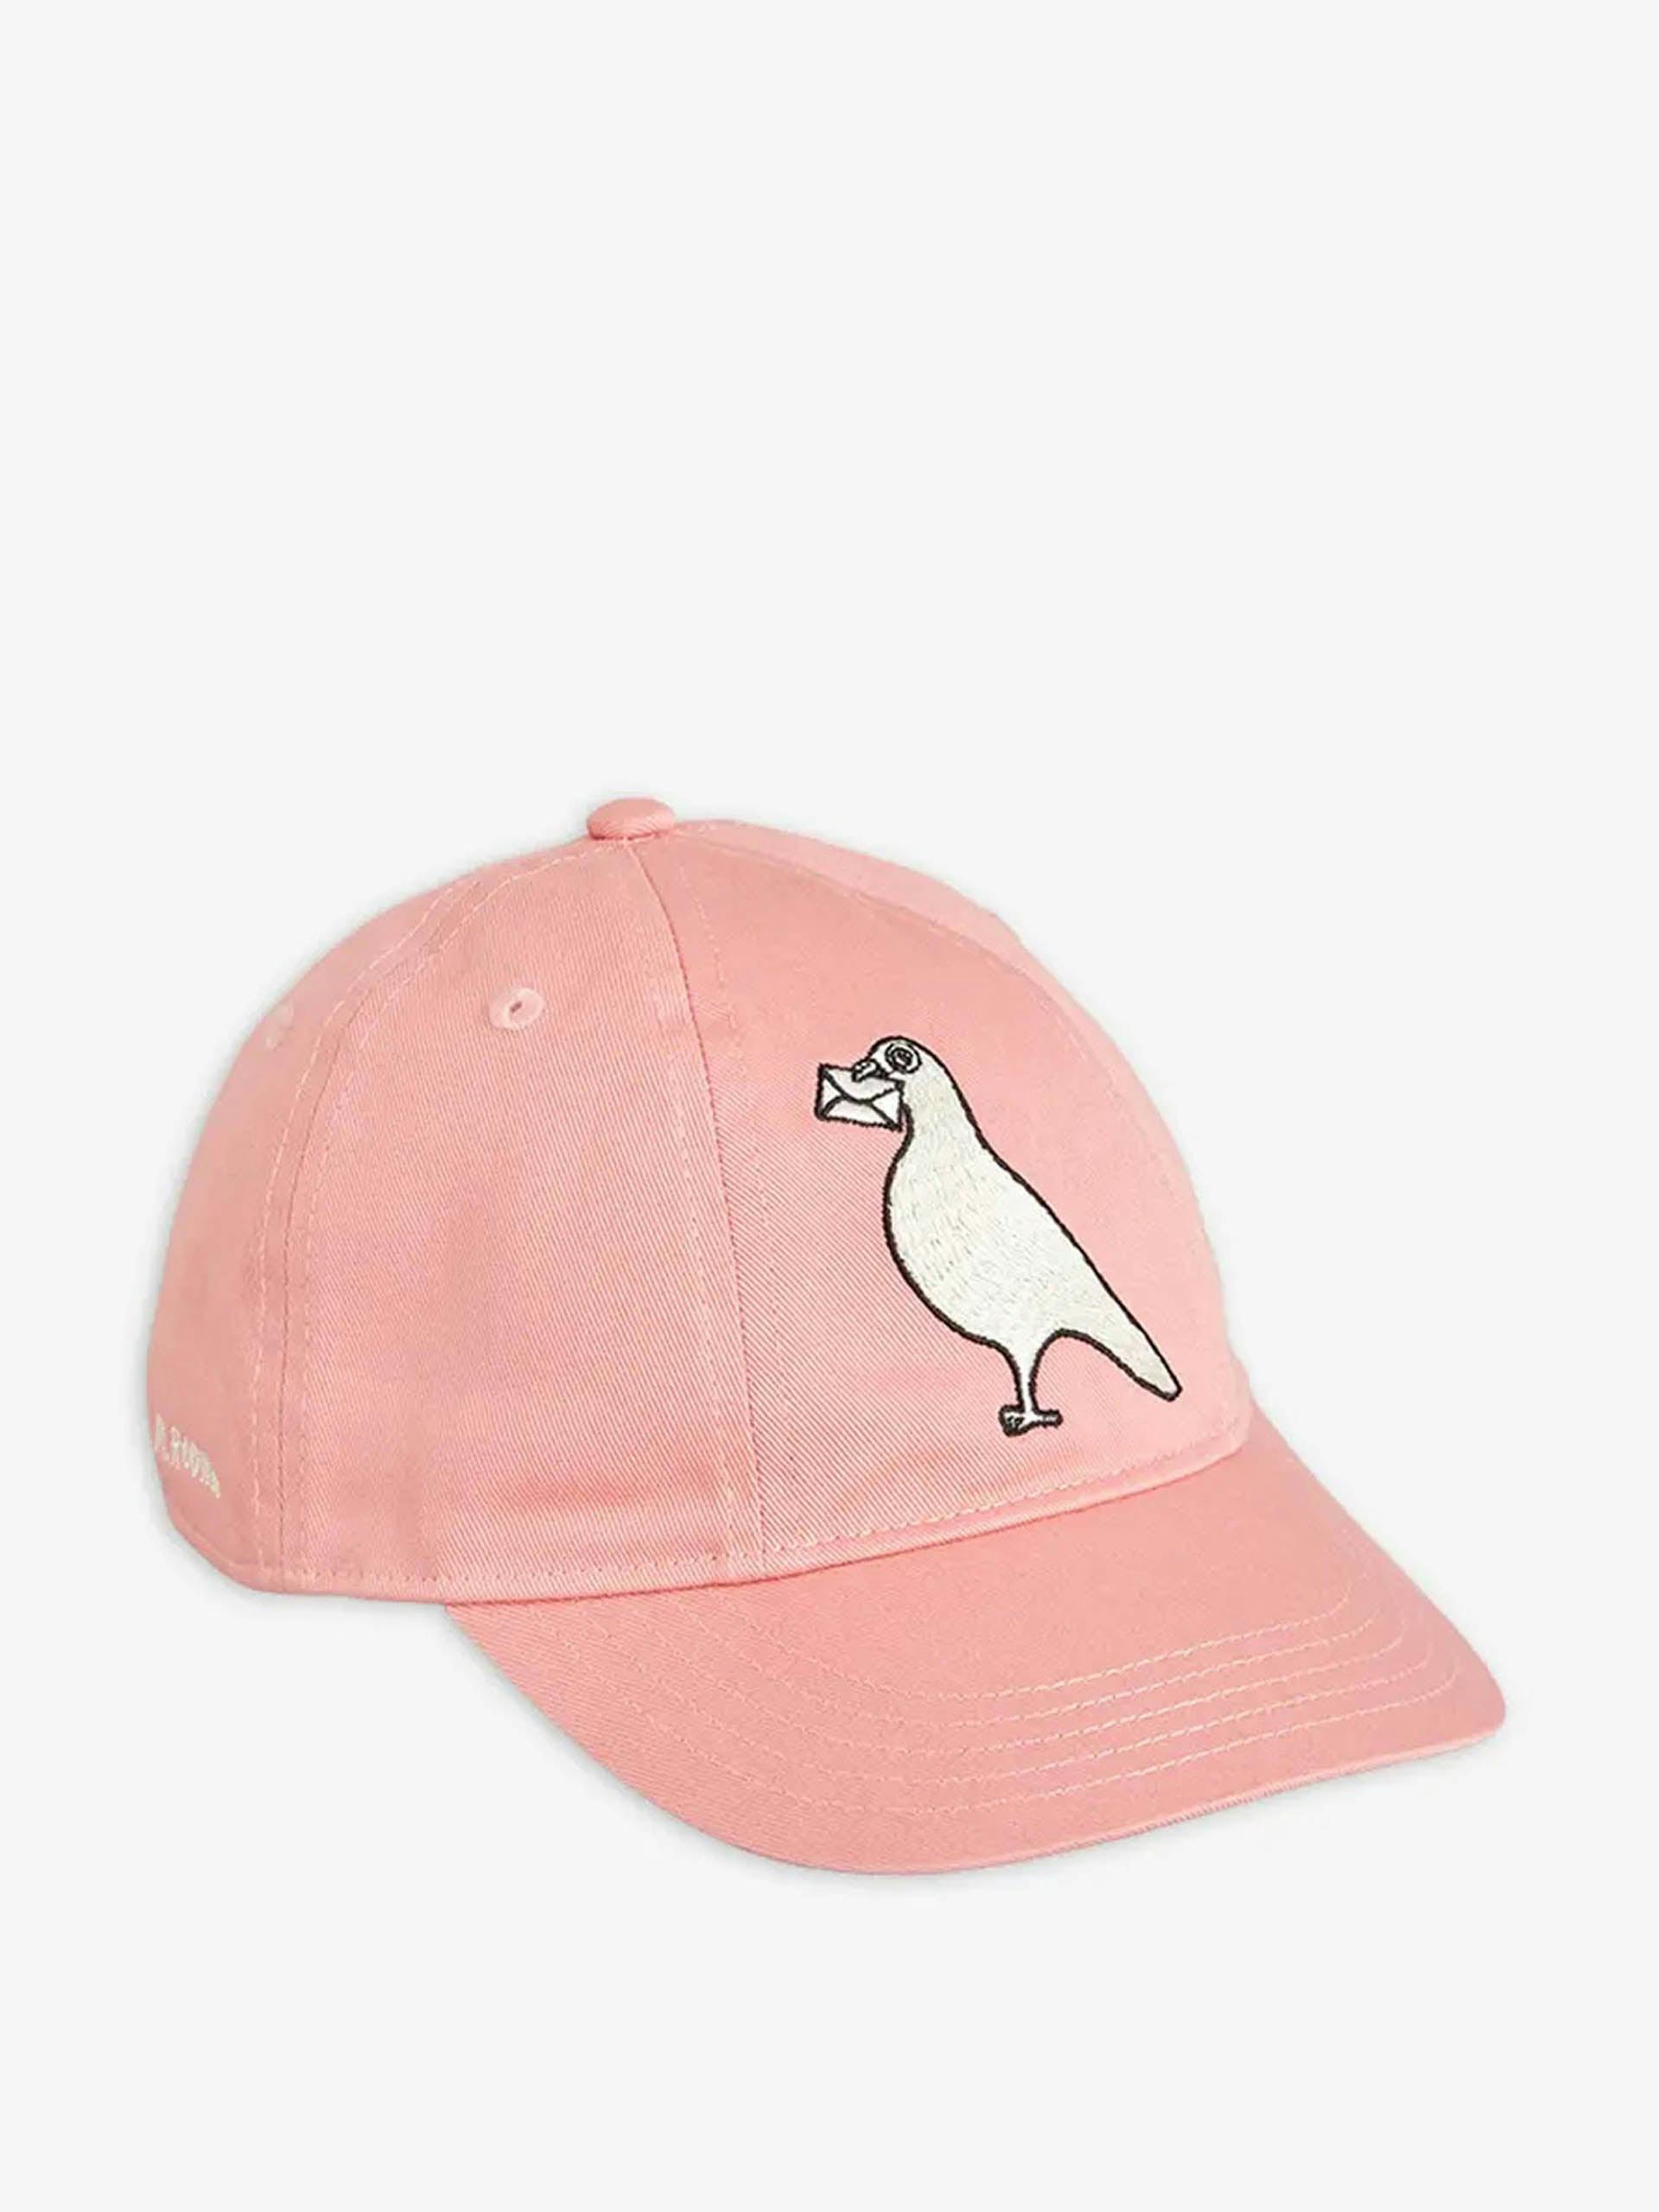 Pigeon embroidered cap